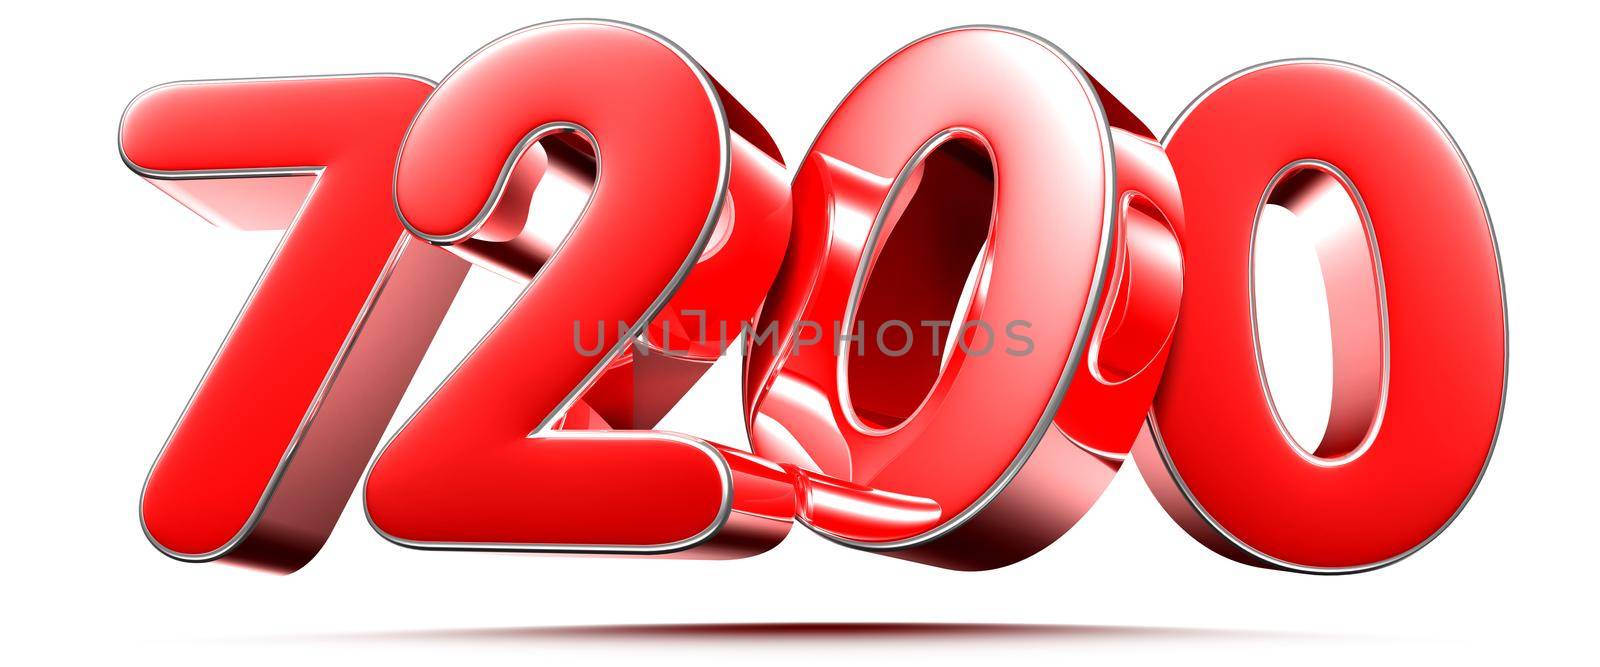 Rounded red numbers 7200 on white background 3D illustration with clipping path by thitimontoyai